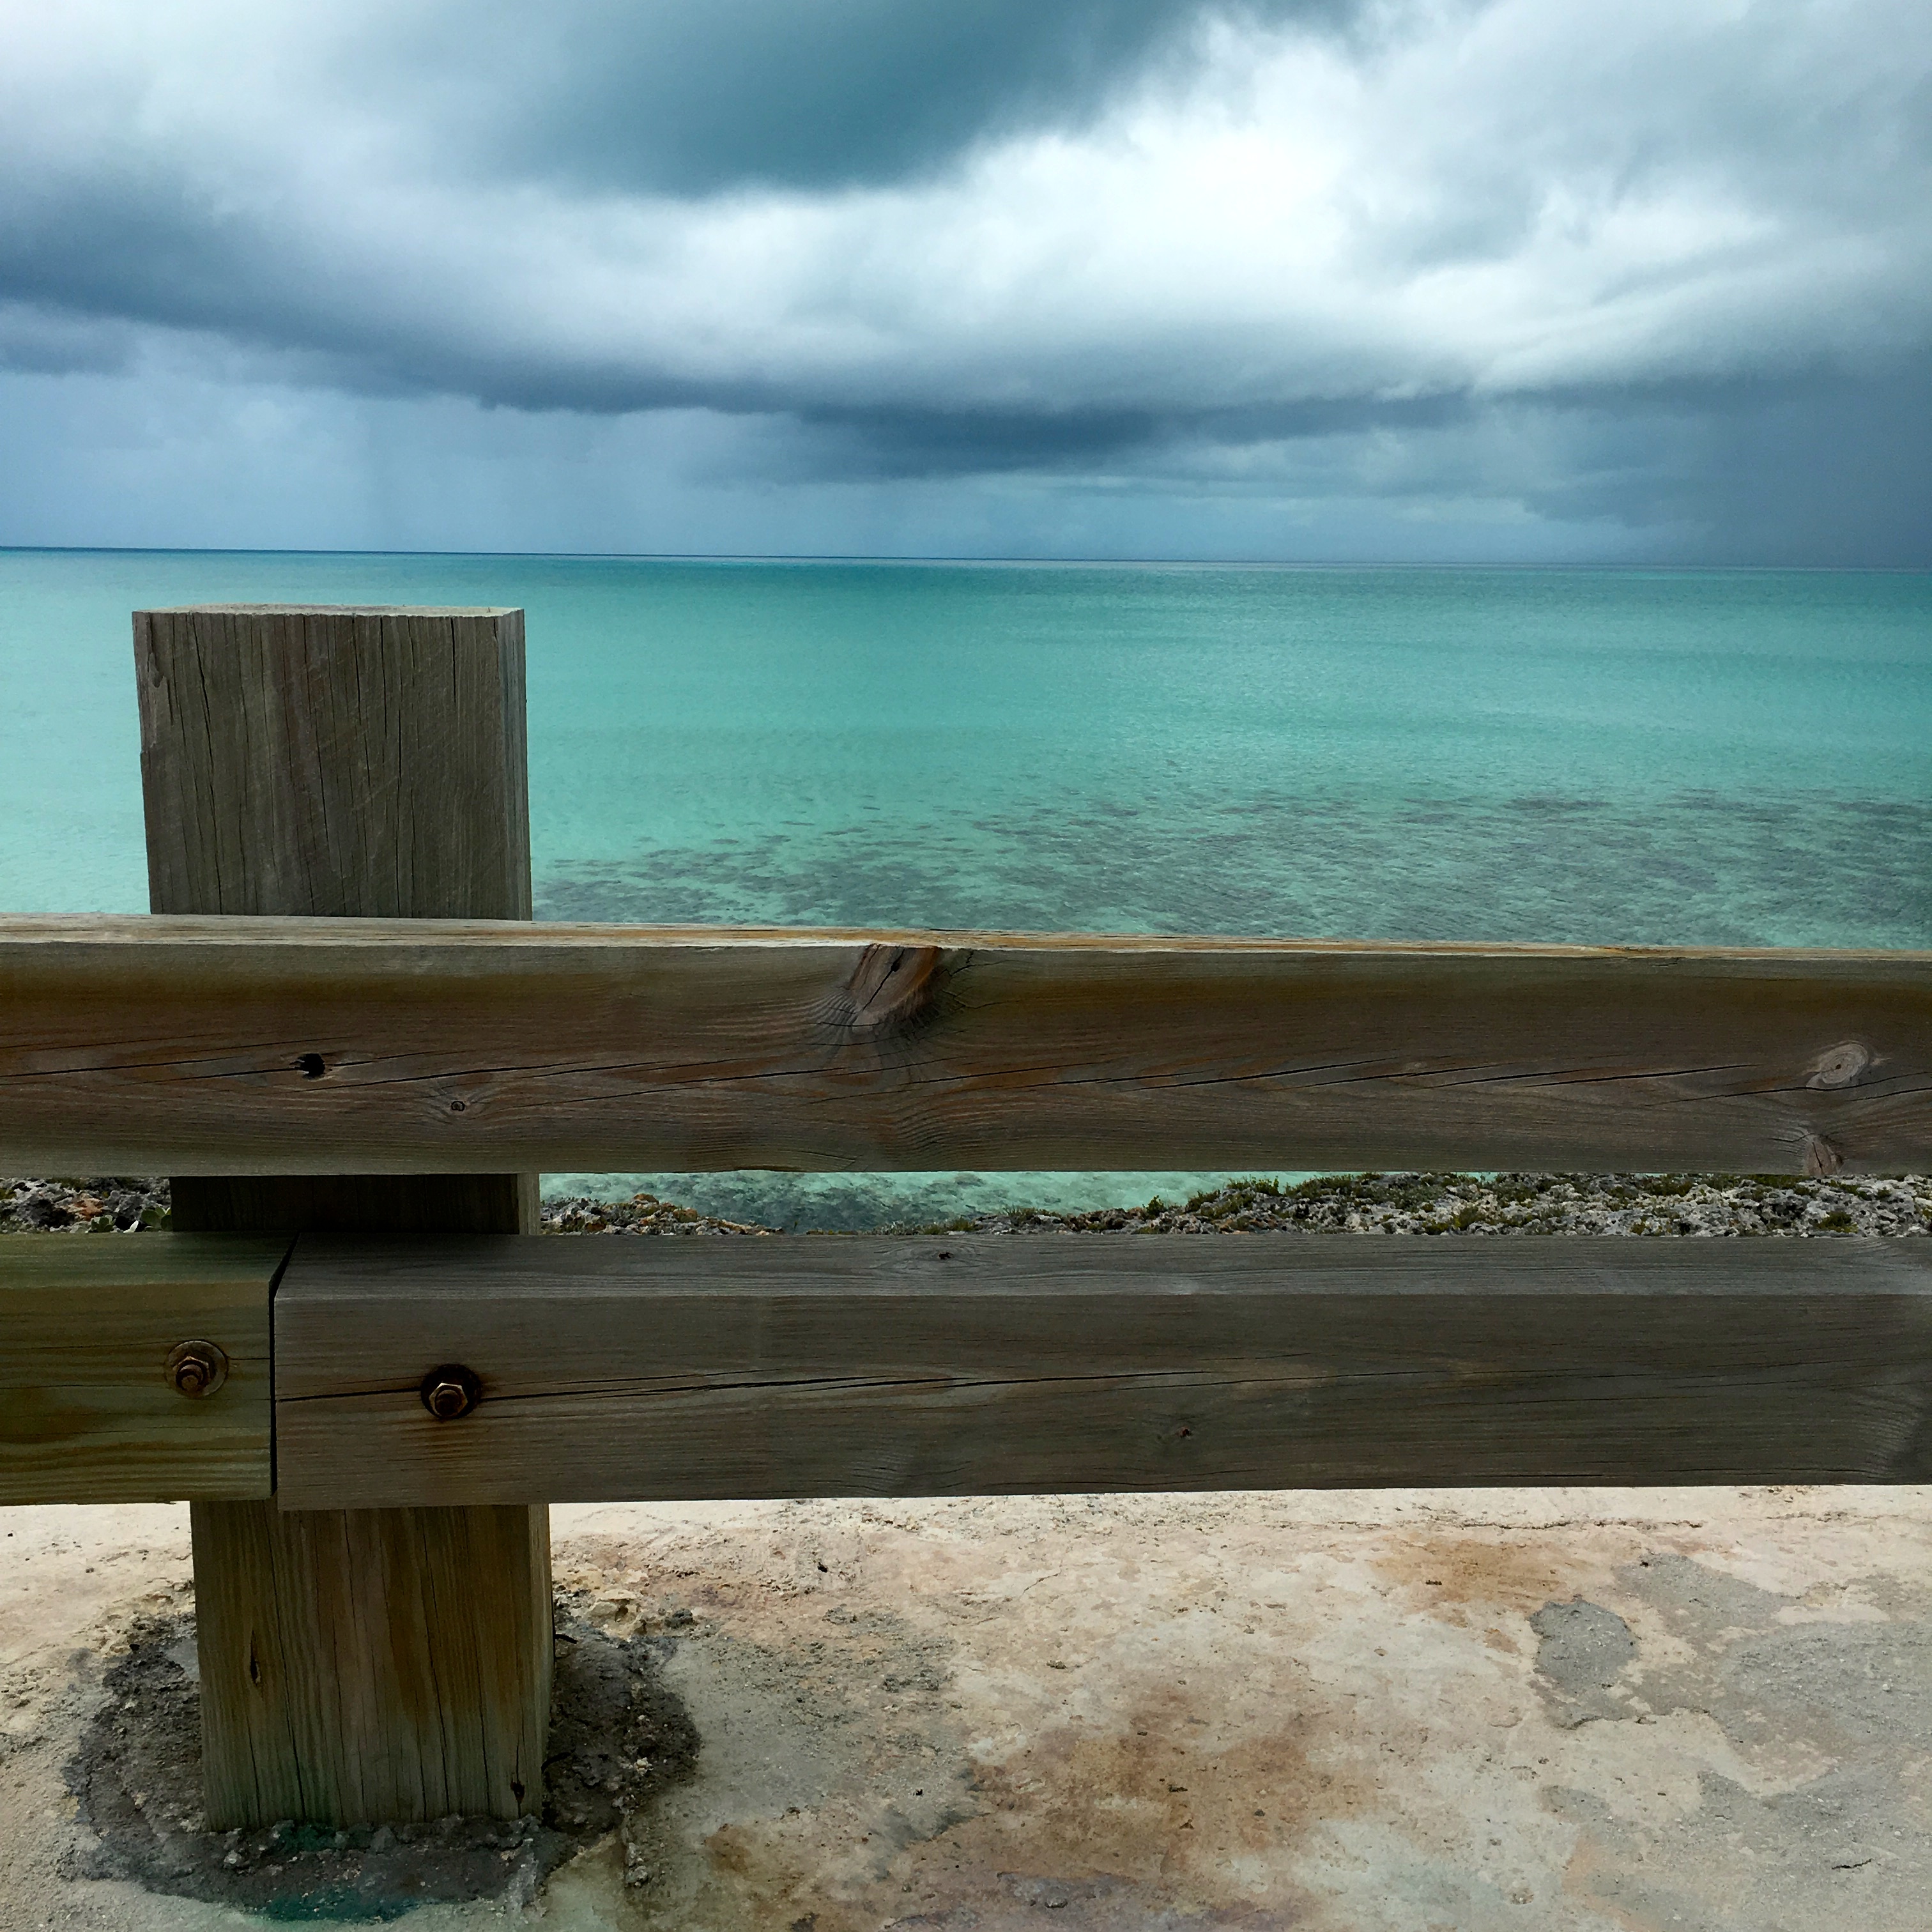 brown wooden fence near body of water under cloudy sky at daytime